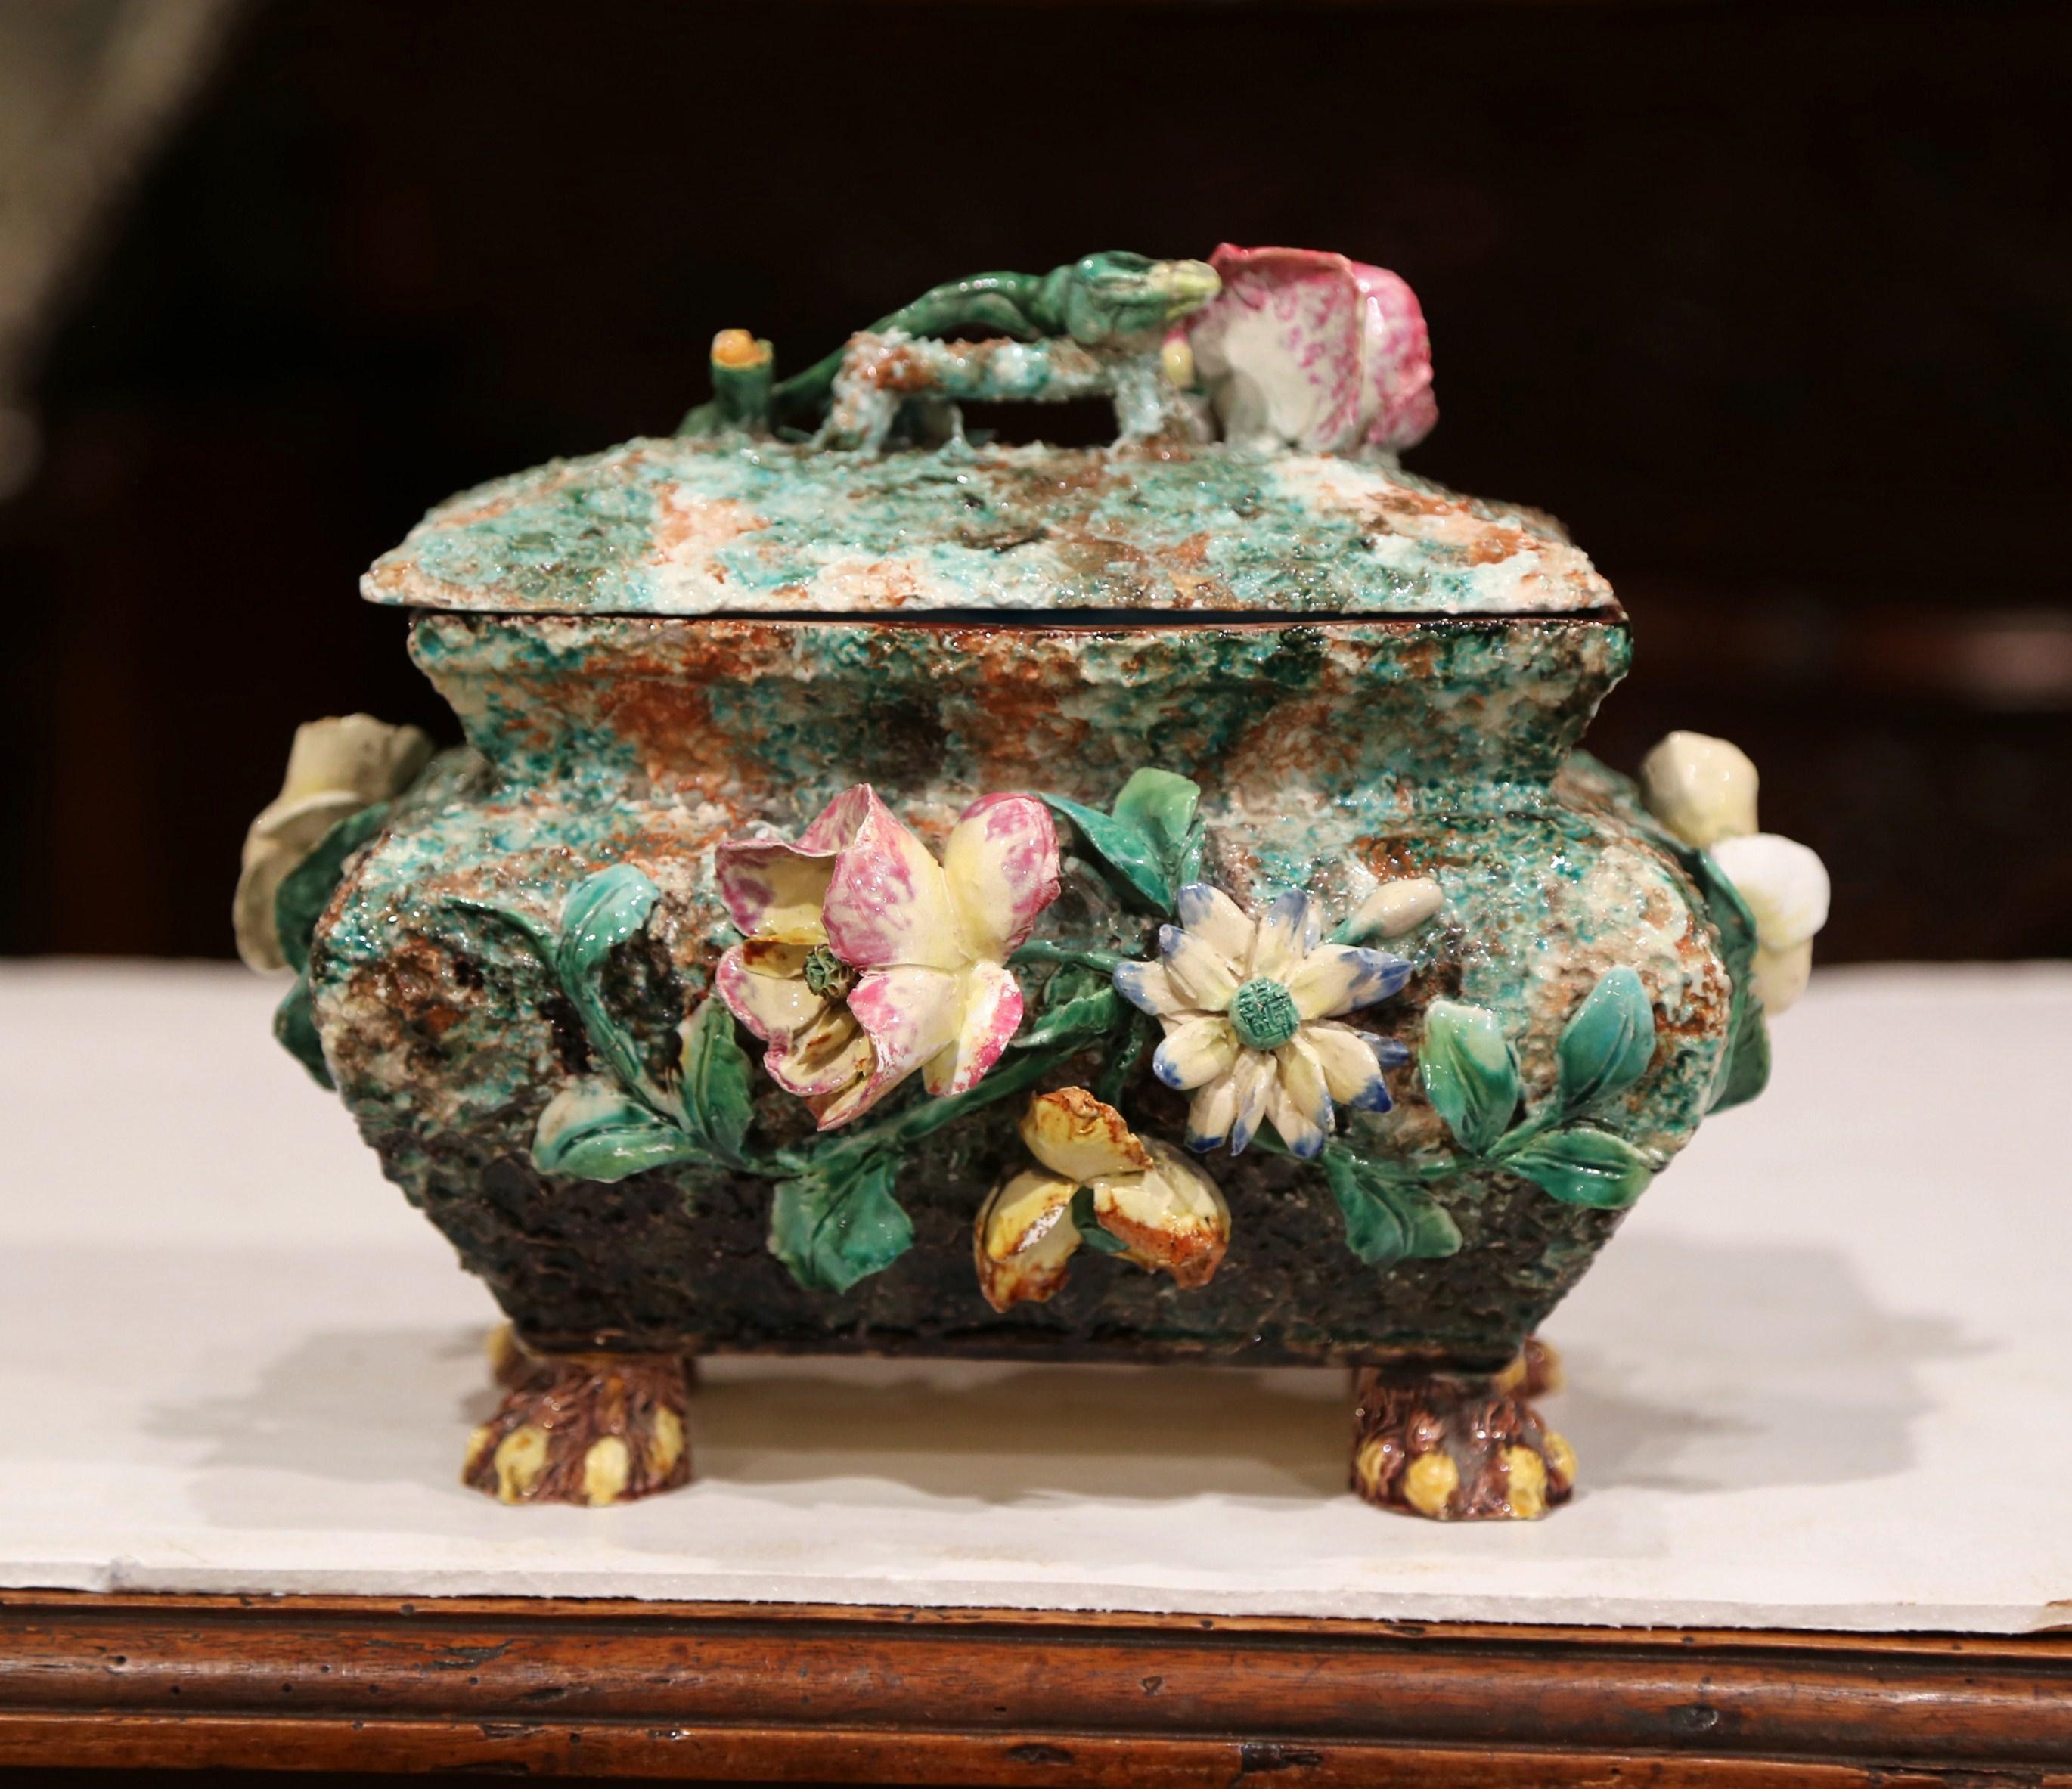 Decorate a shelf with this elegant and colorful antique Majolica box. Crafted in France circa 1860, the decorative ceramic piece sits on small feet with claws. The whimsical bombe casket is fully decorated on all four sides in realistic high relief